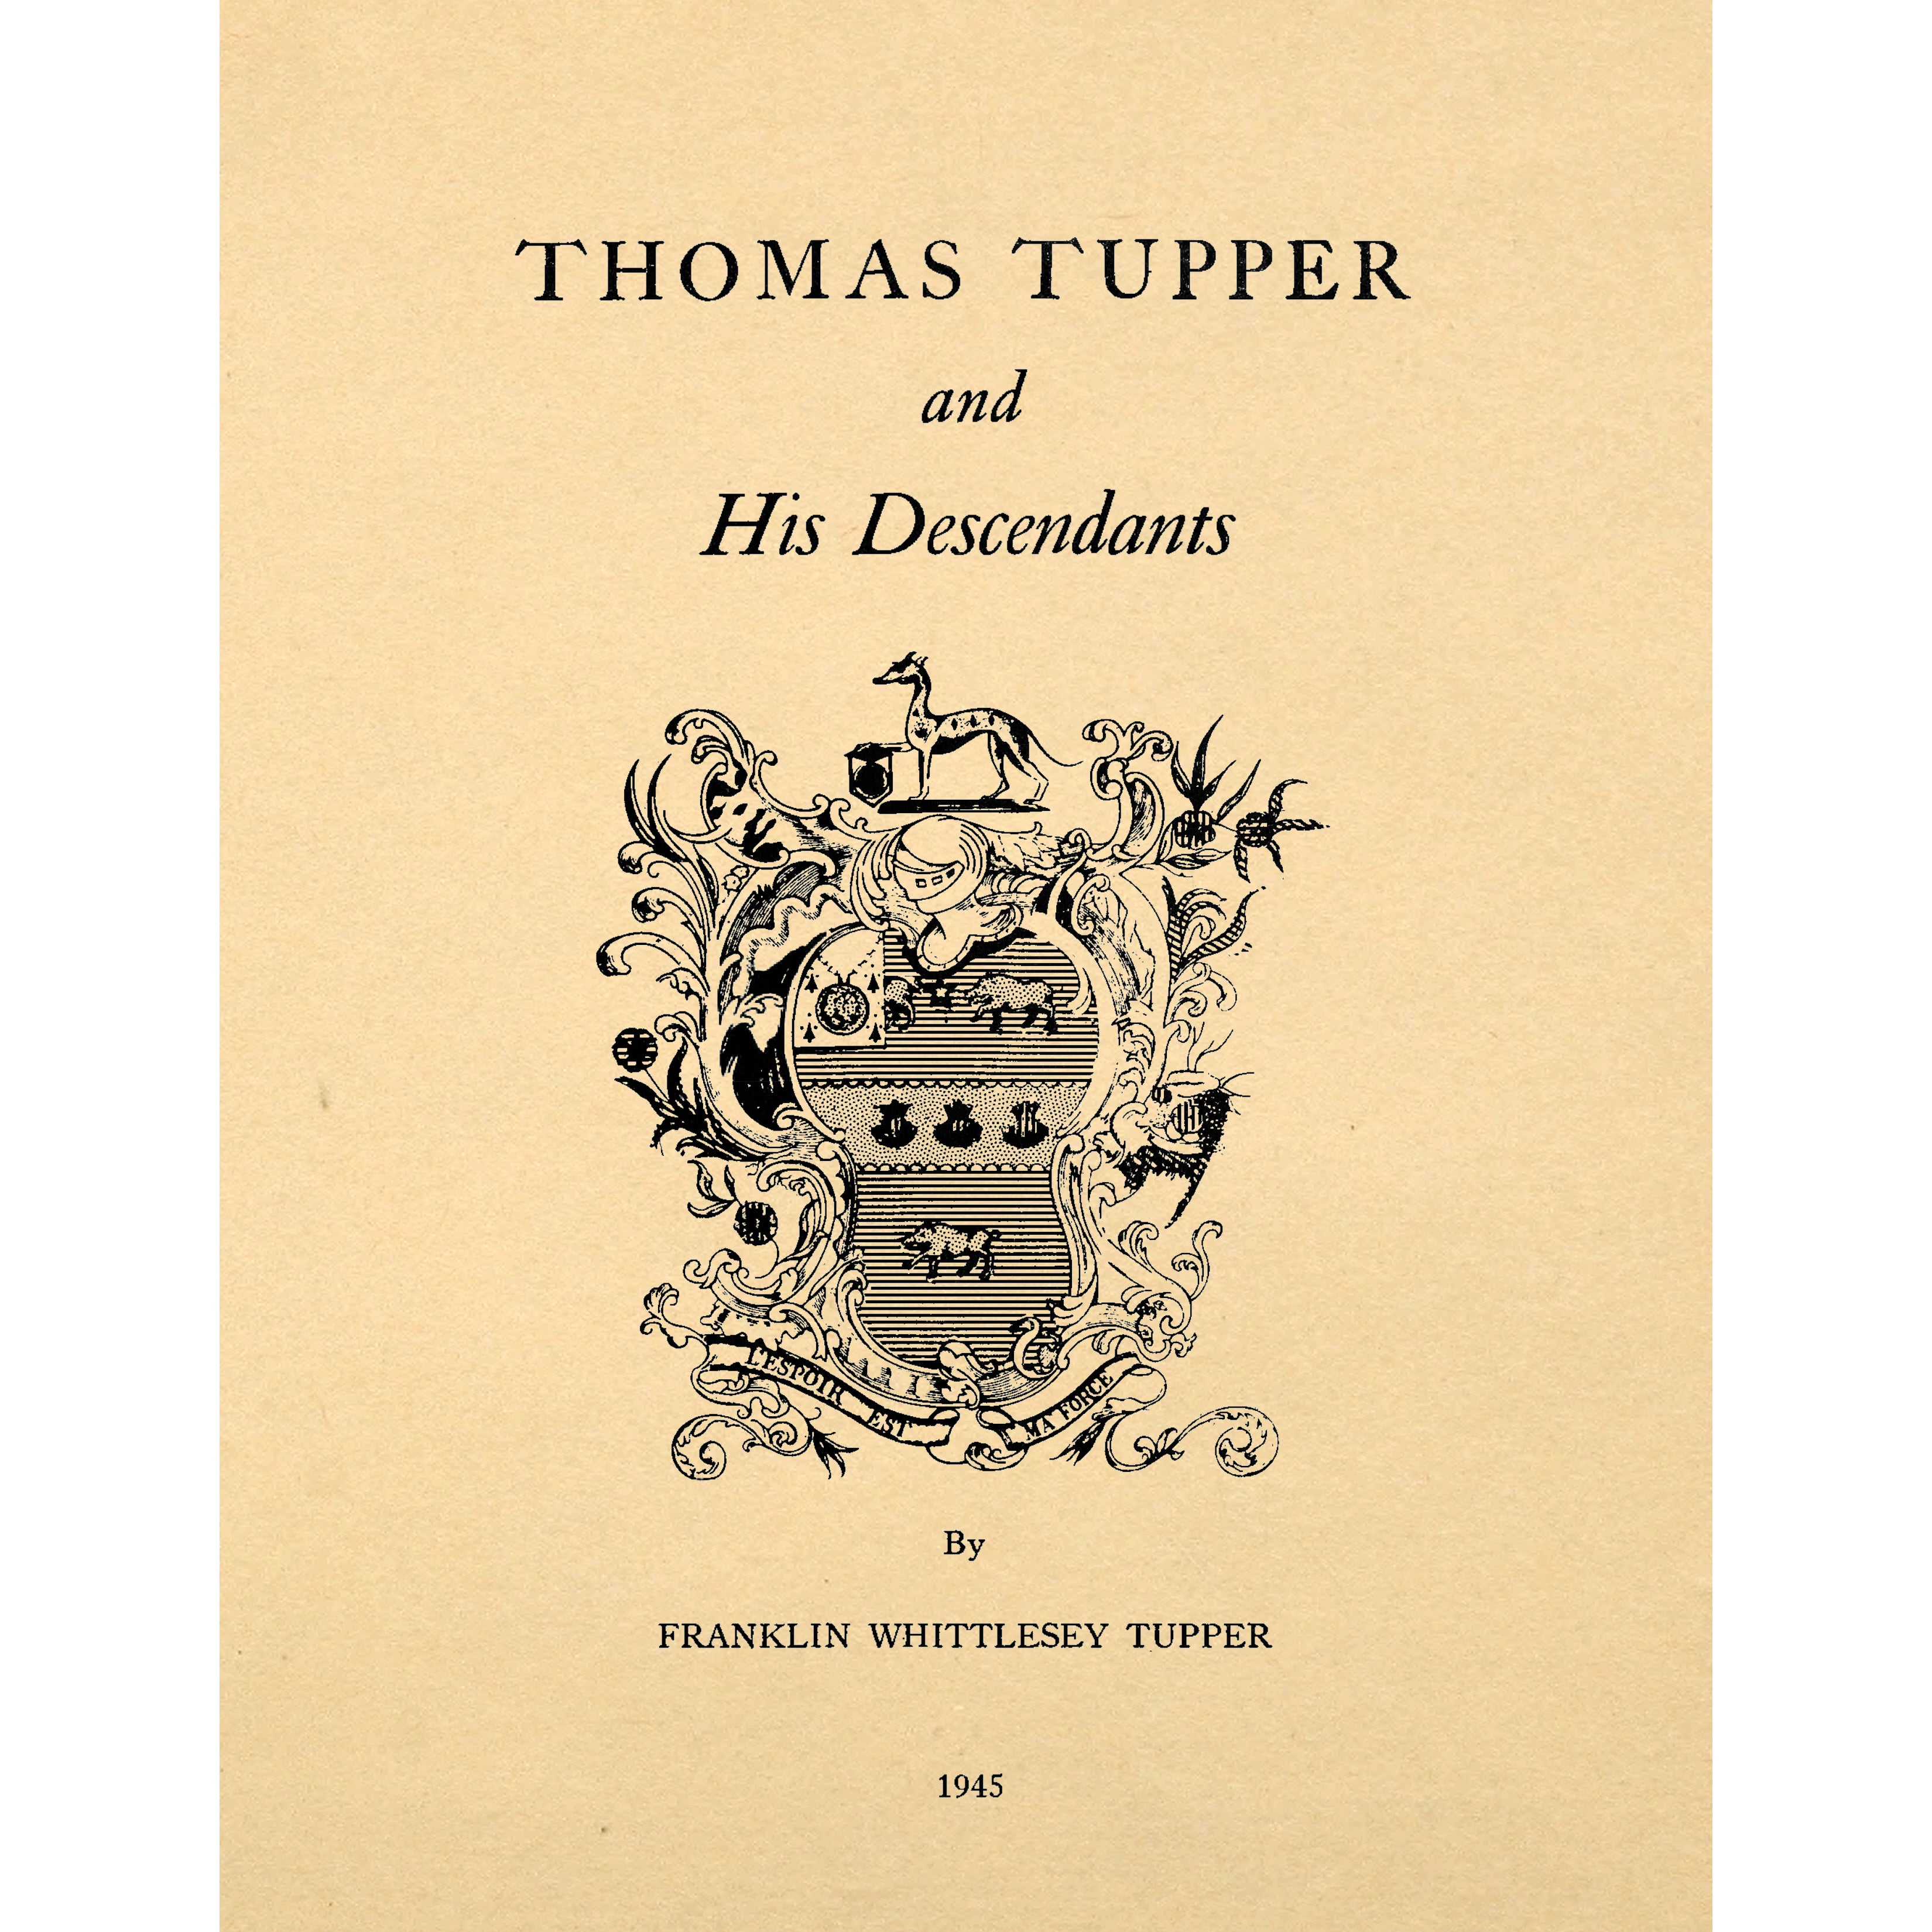 Thomas Tupper and his Descendants, 2nd Edition